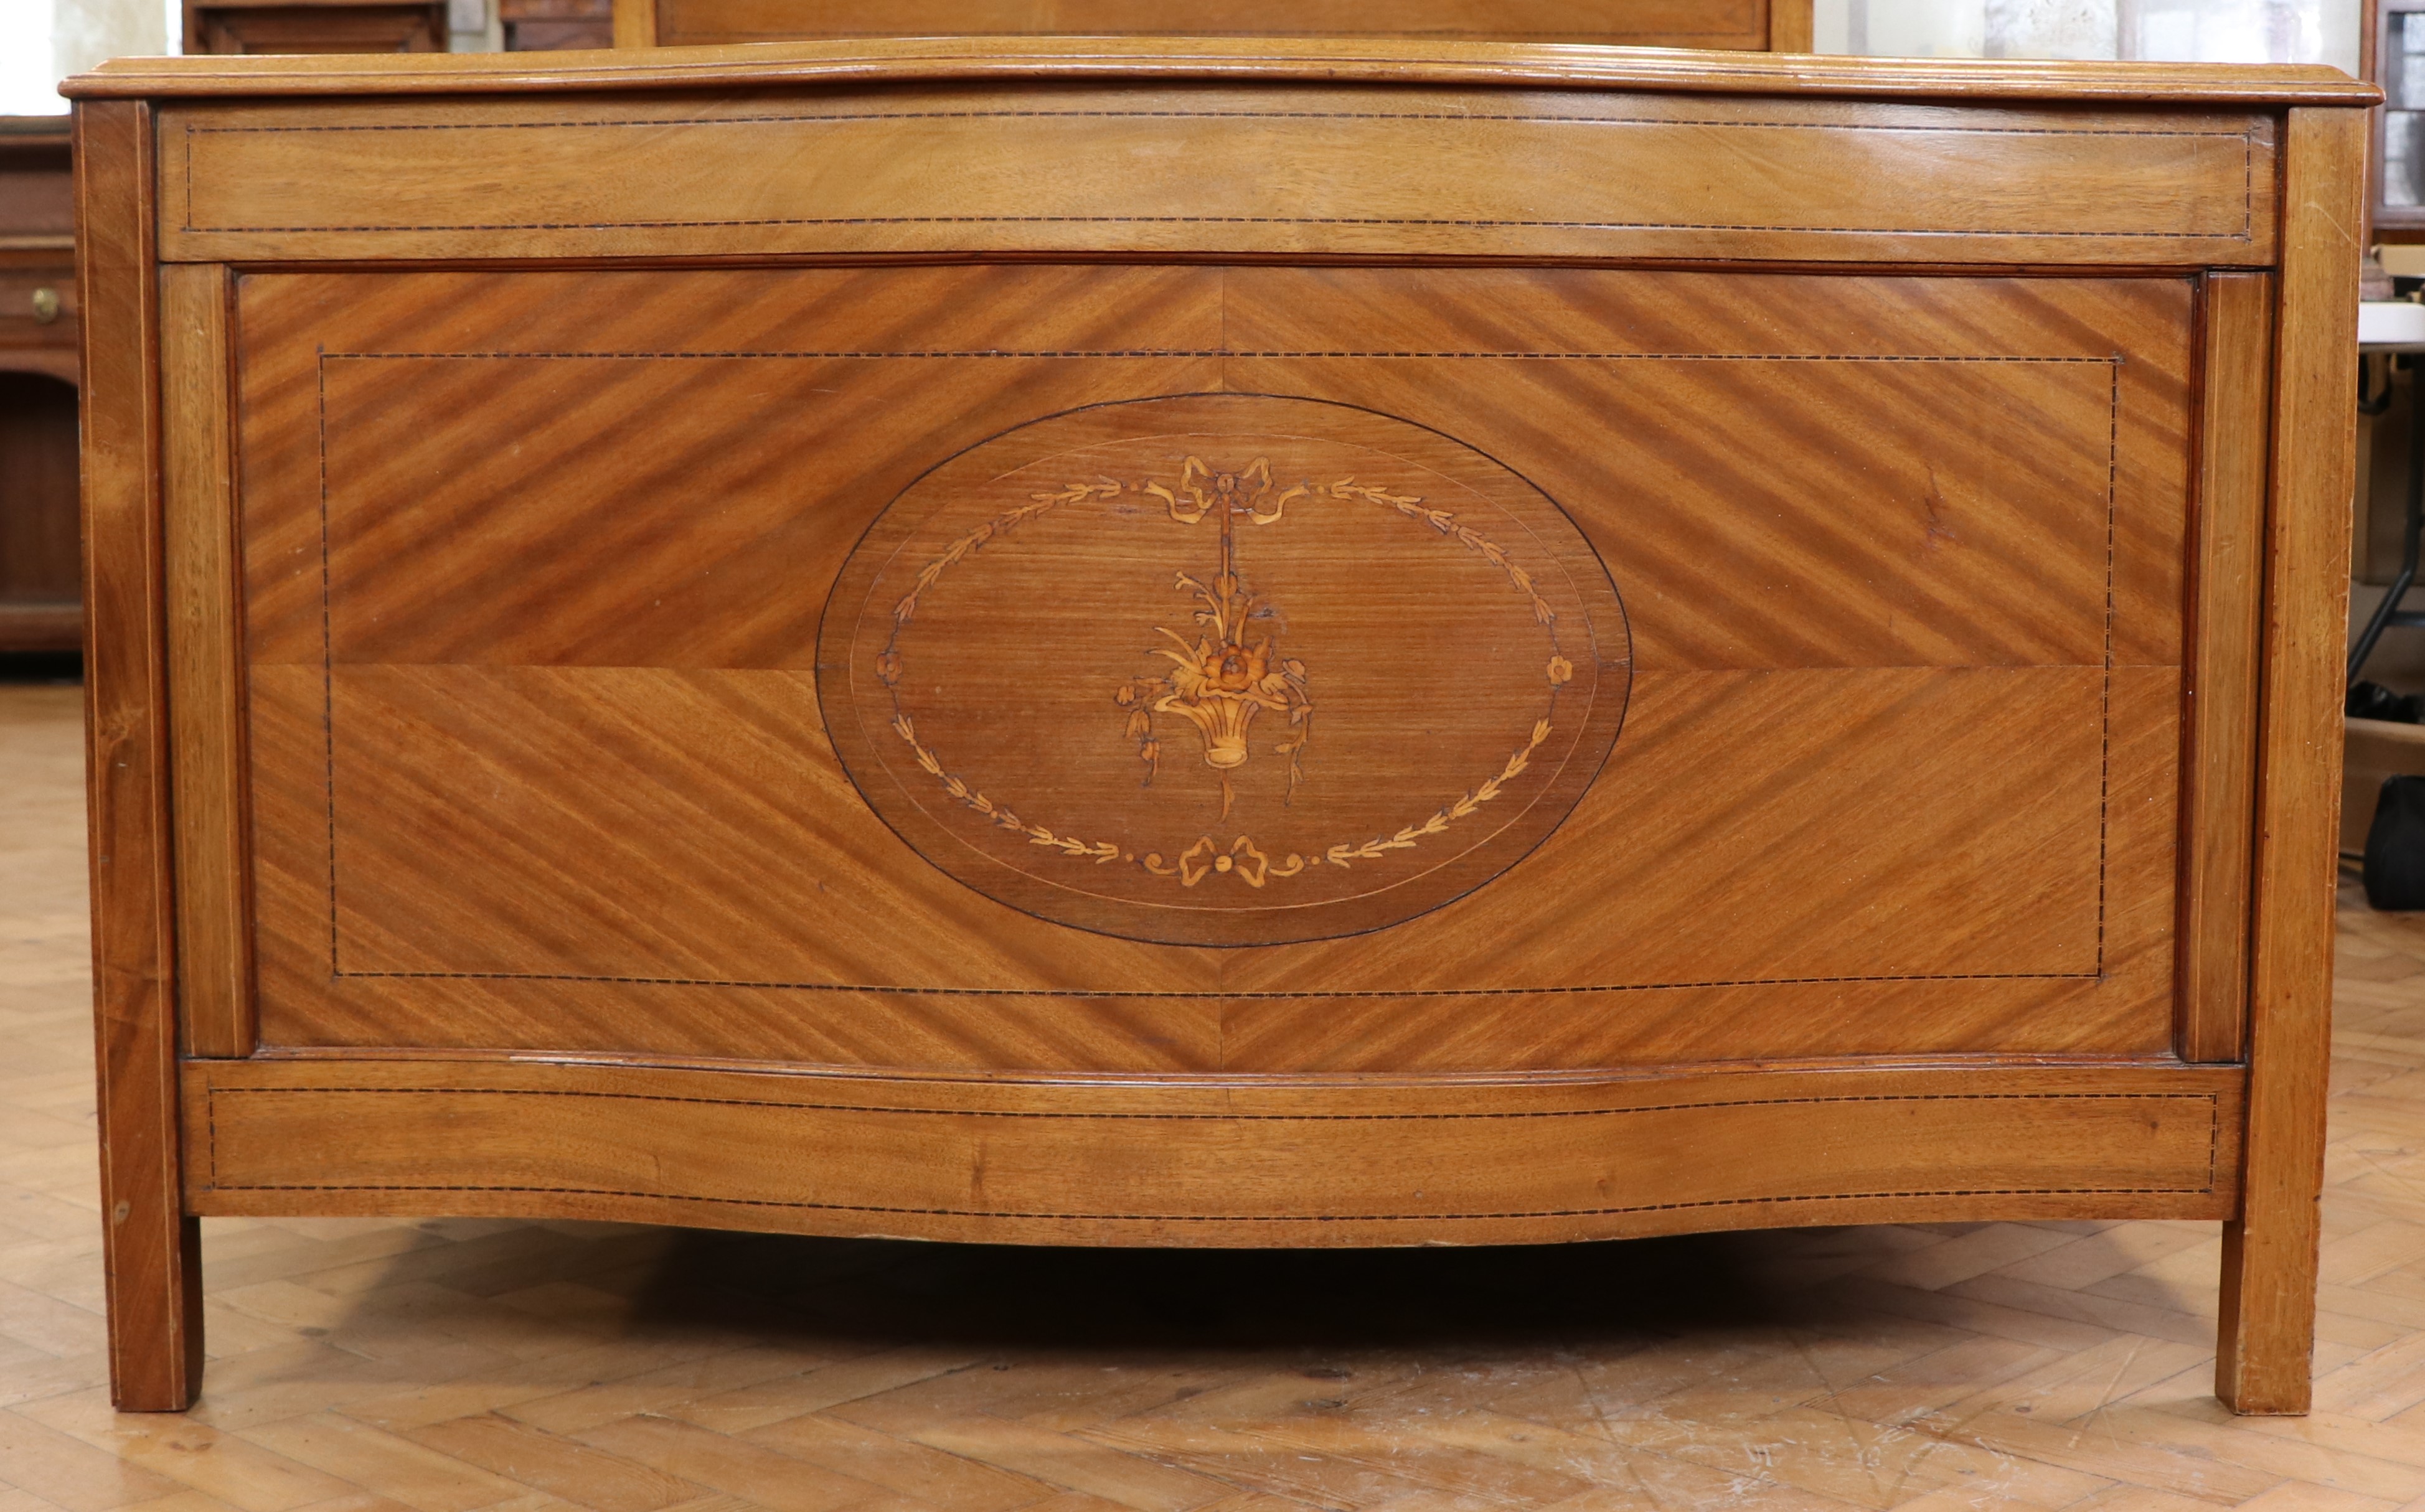 A Sheraton Revival marquetry-inlaid mahogany 4' 6" bedstead, with rails and base, (rails 6' 4" - Image 4 of 6